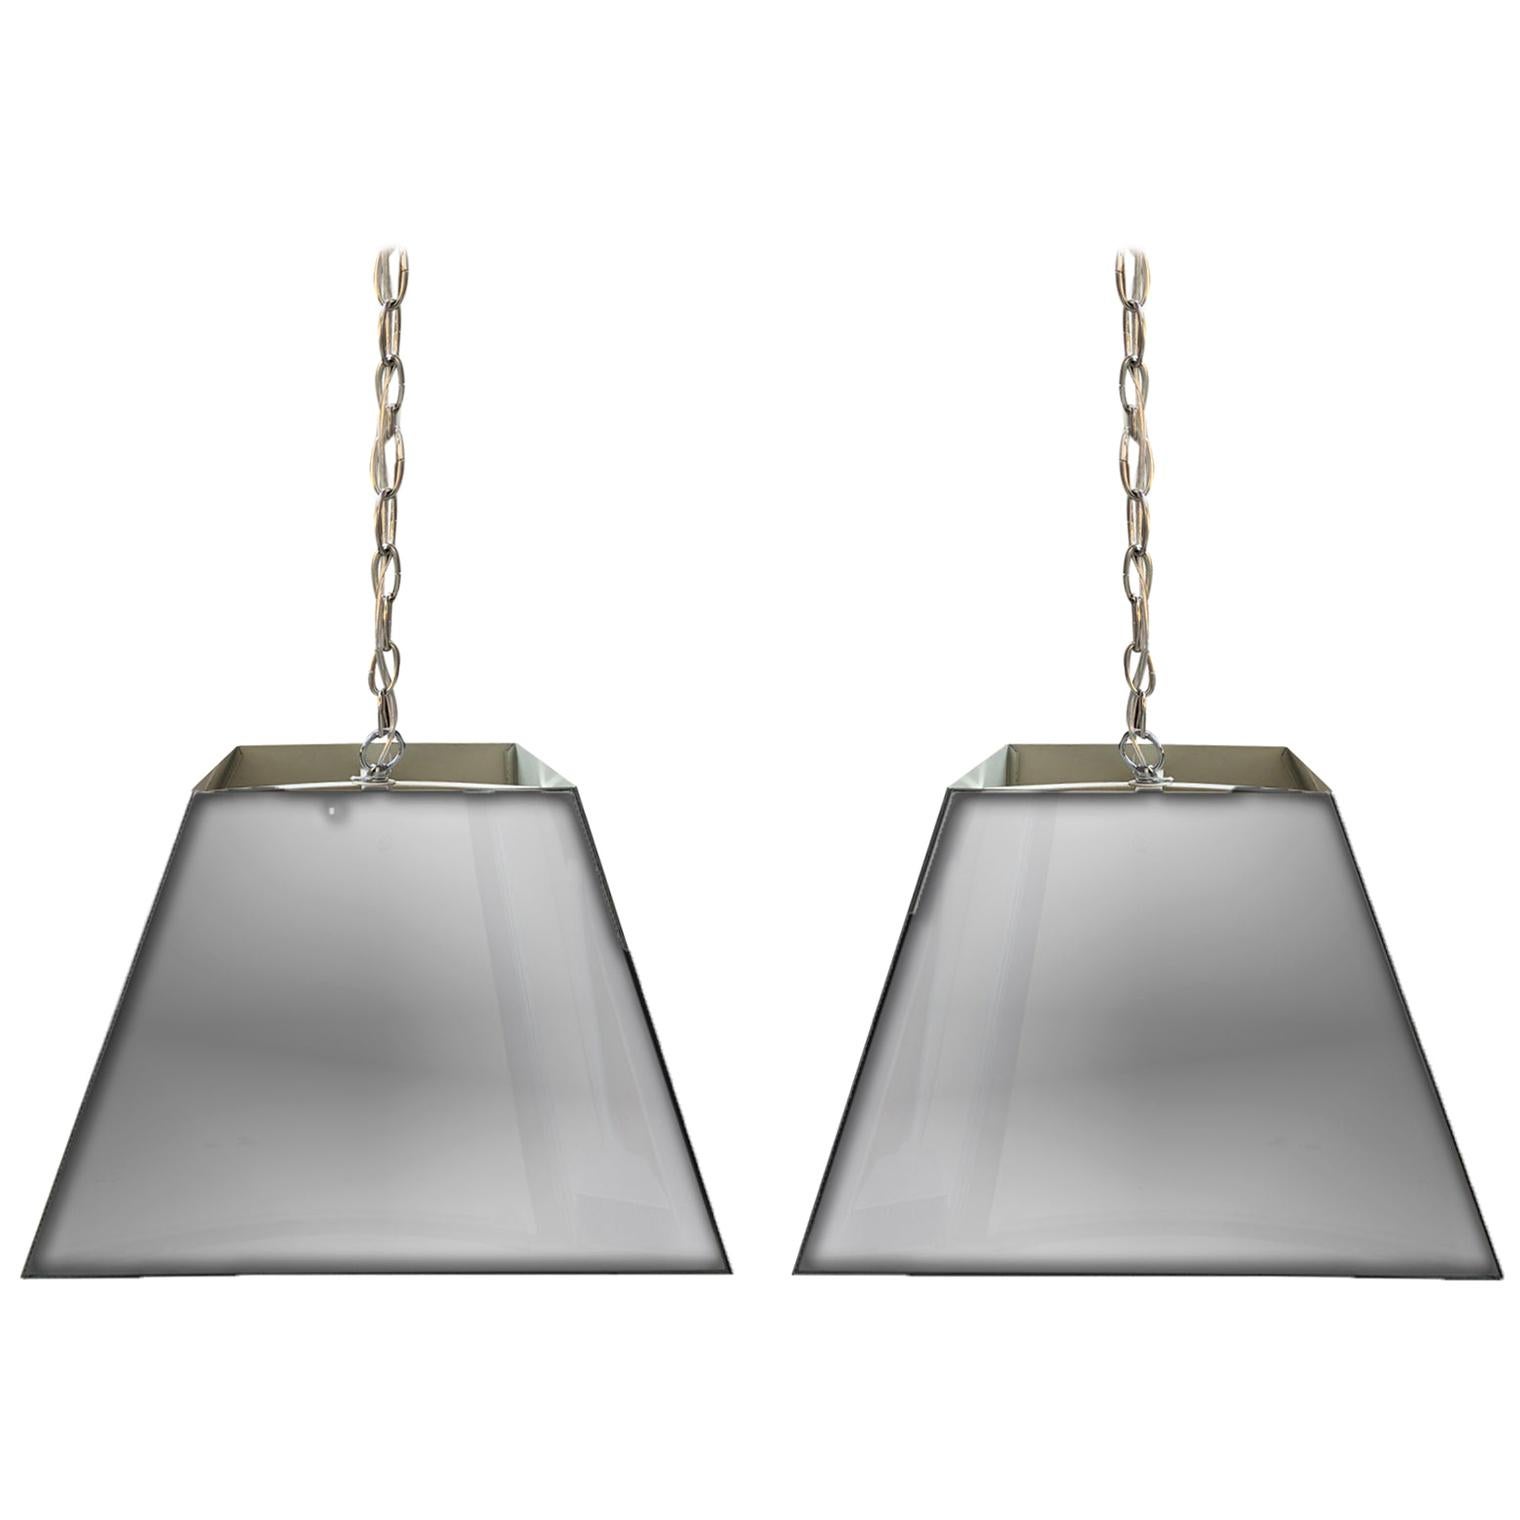 Pair of Mid-20th Century Square Chrome Hanging Shades